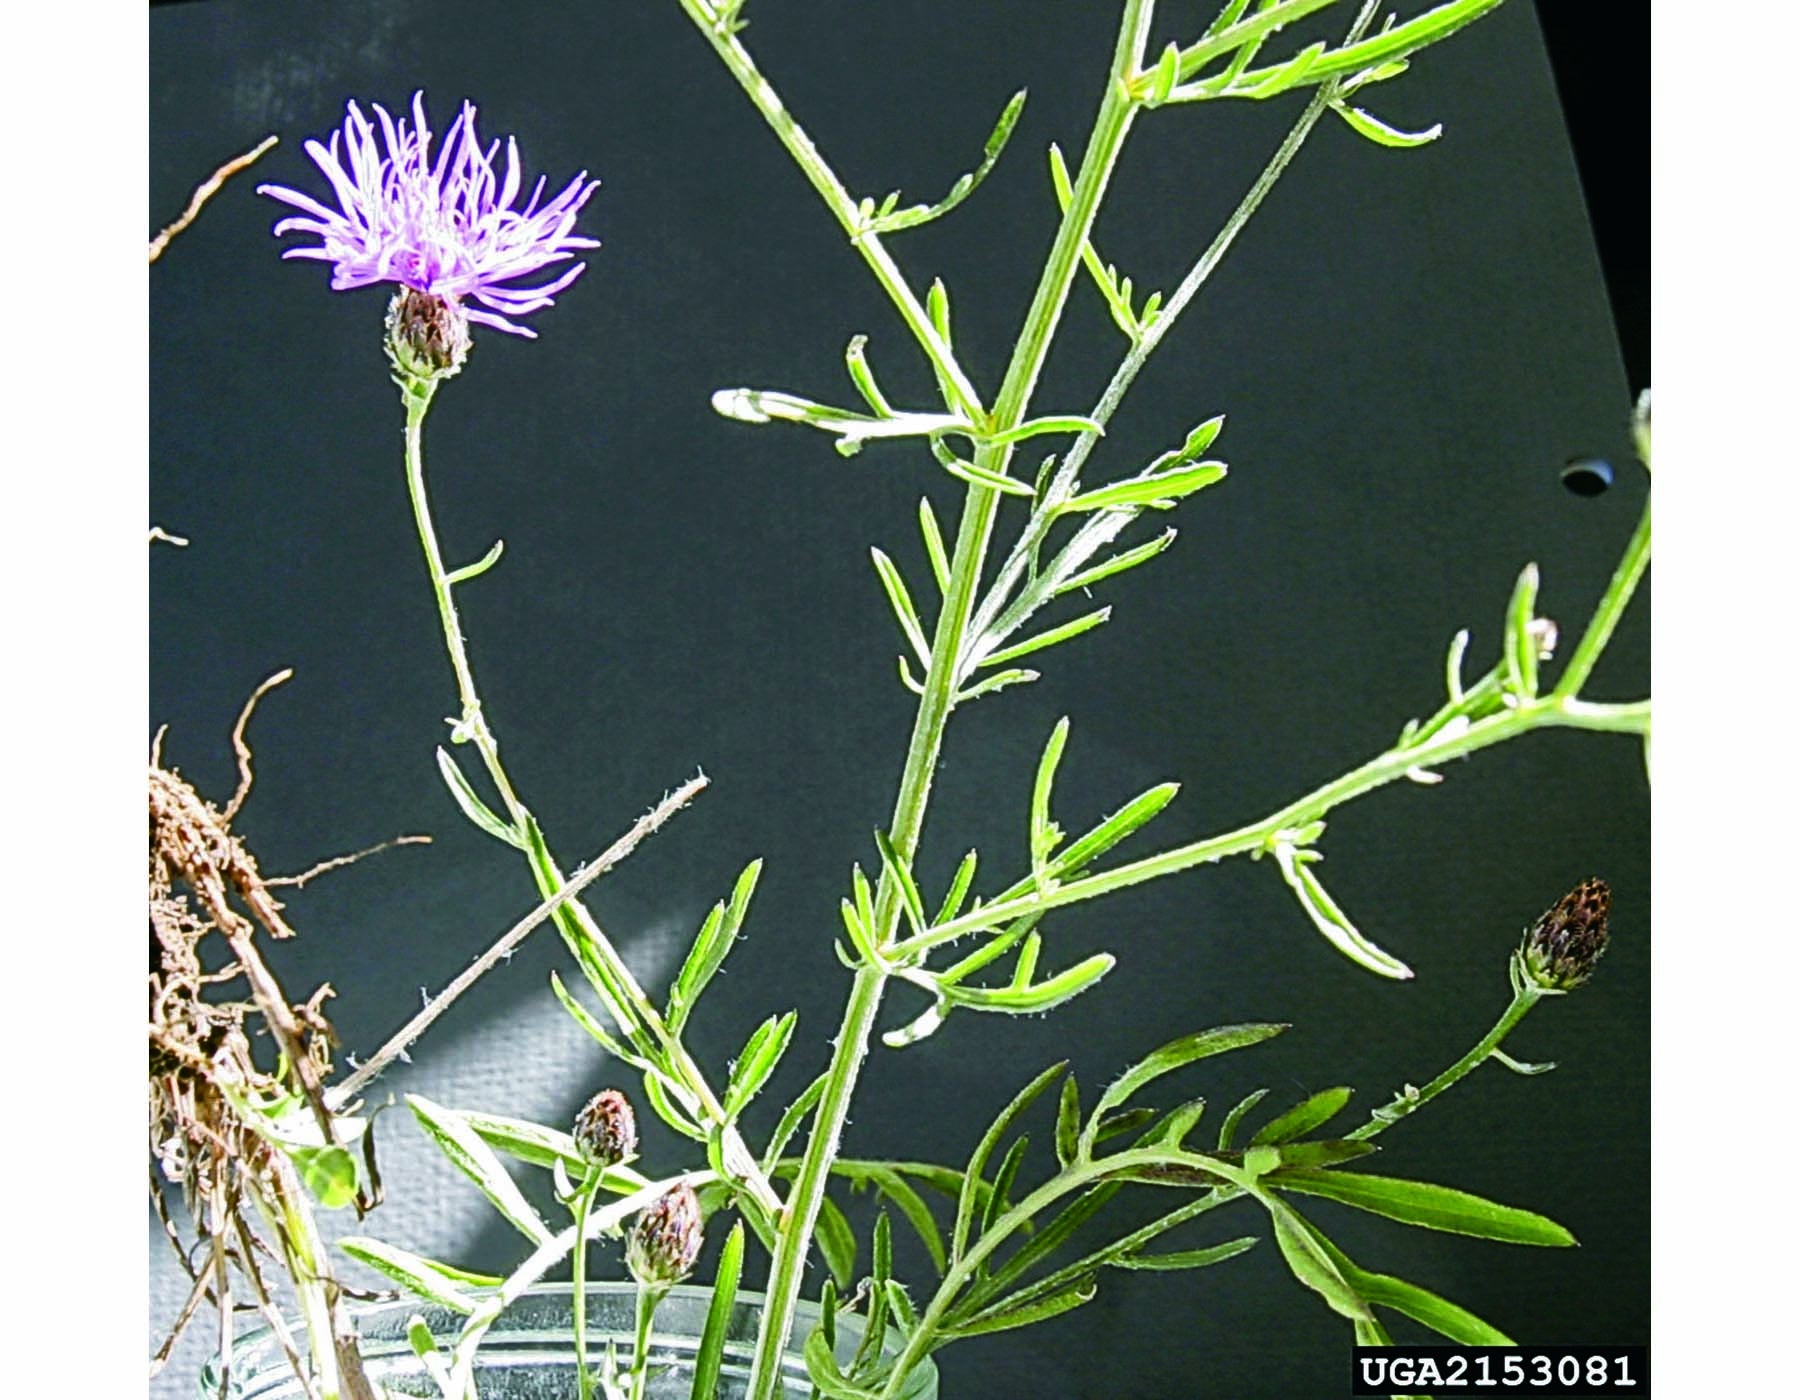 Photo of spotted knapweed plant showing foliage and growth habit